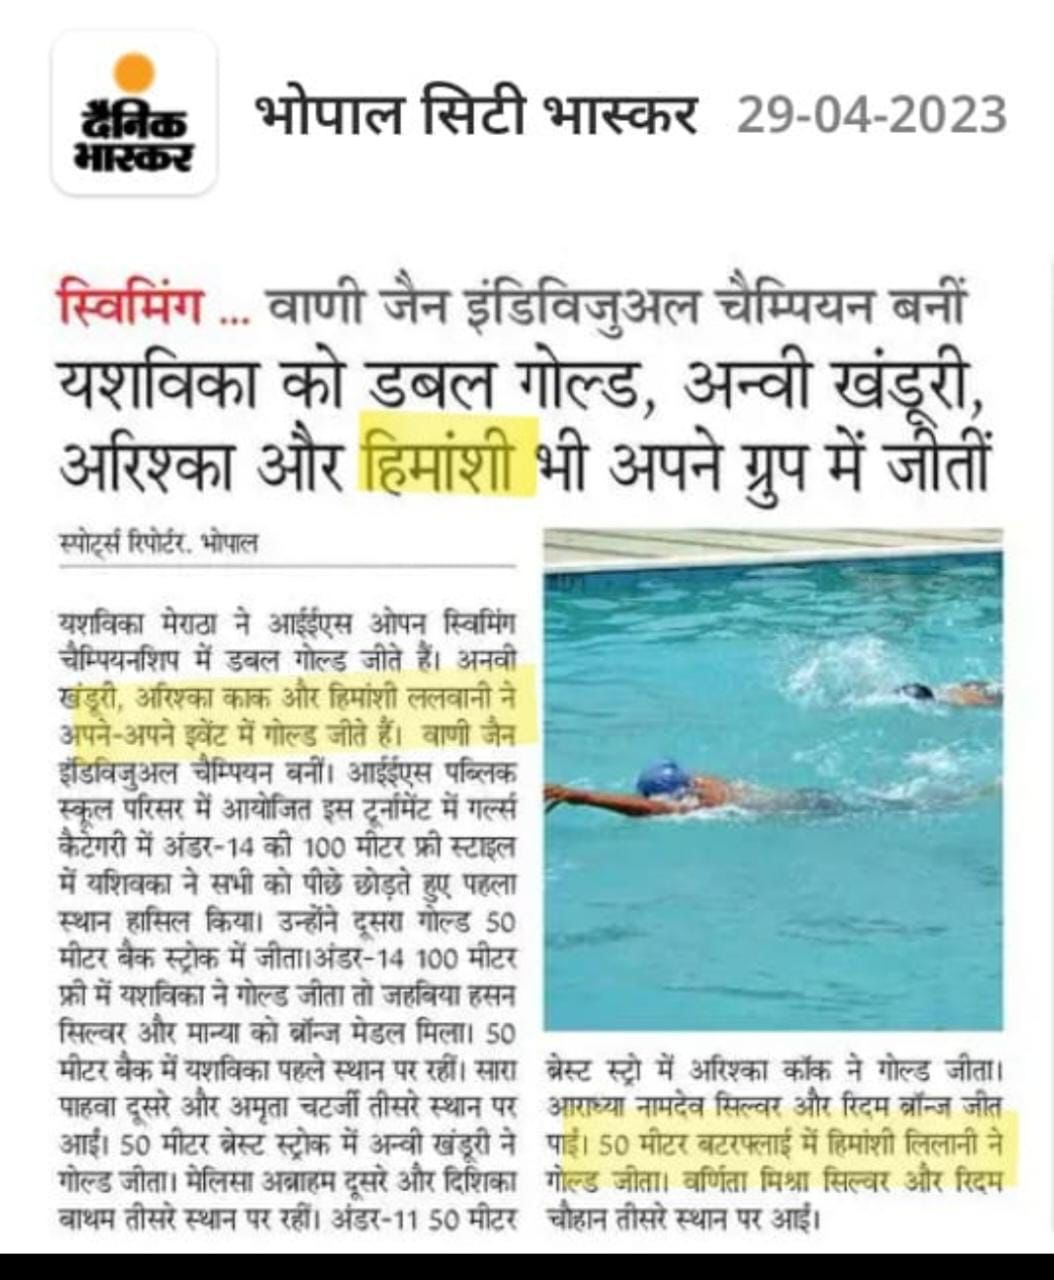 A Gold medal in IES Open Swimming Championship 